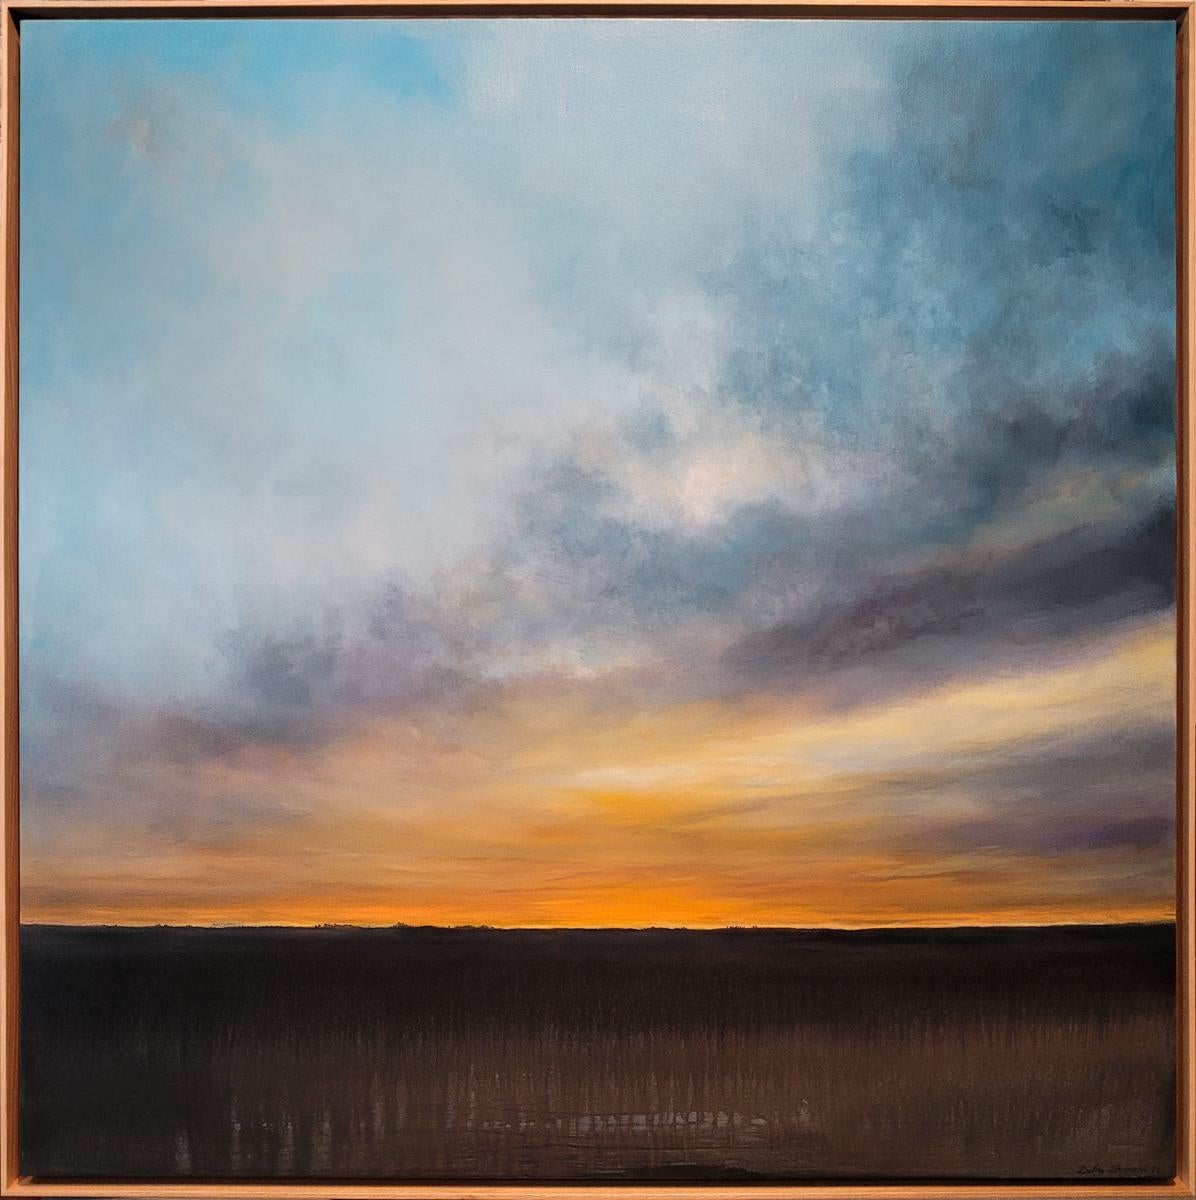 Vesper is a beautiful abstract sunset landscape painting from Debra Ferrari's Forces of Nature Collection. This is one of her most popular collections featuring sunsets and storms. 
